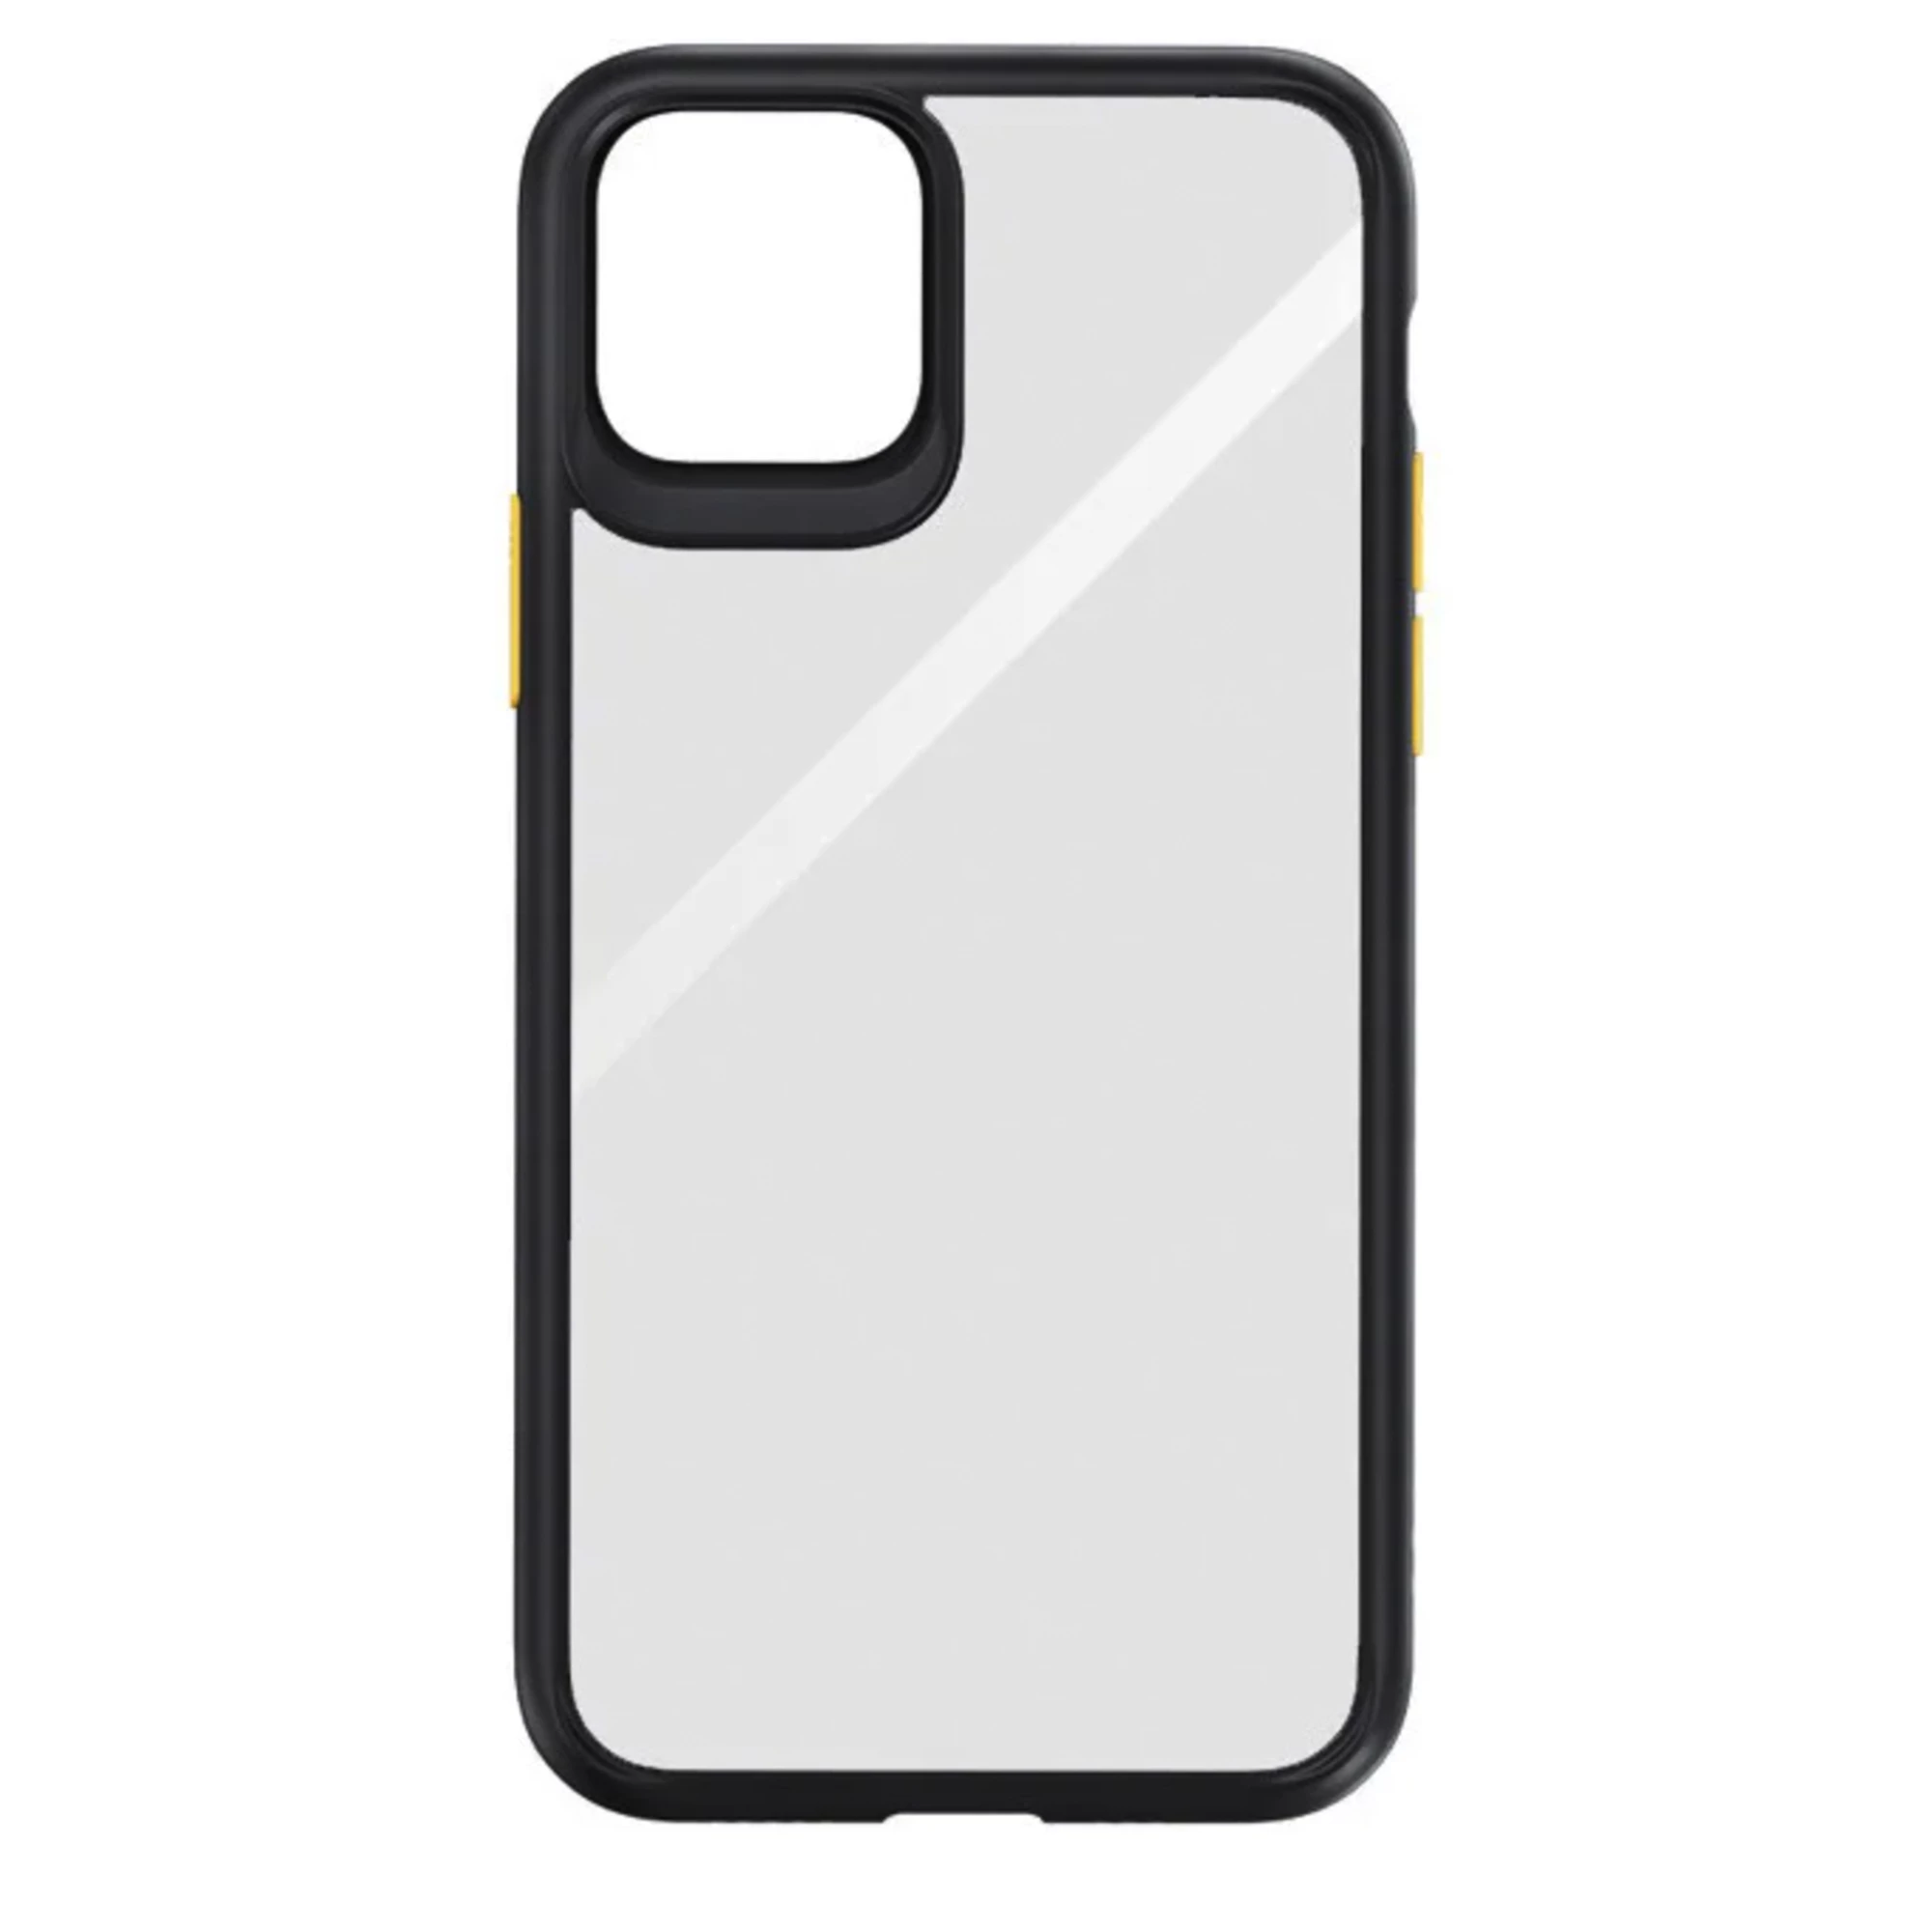 Rock Guard Series for iPhone 11 Pro - Black / Yellow